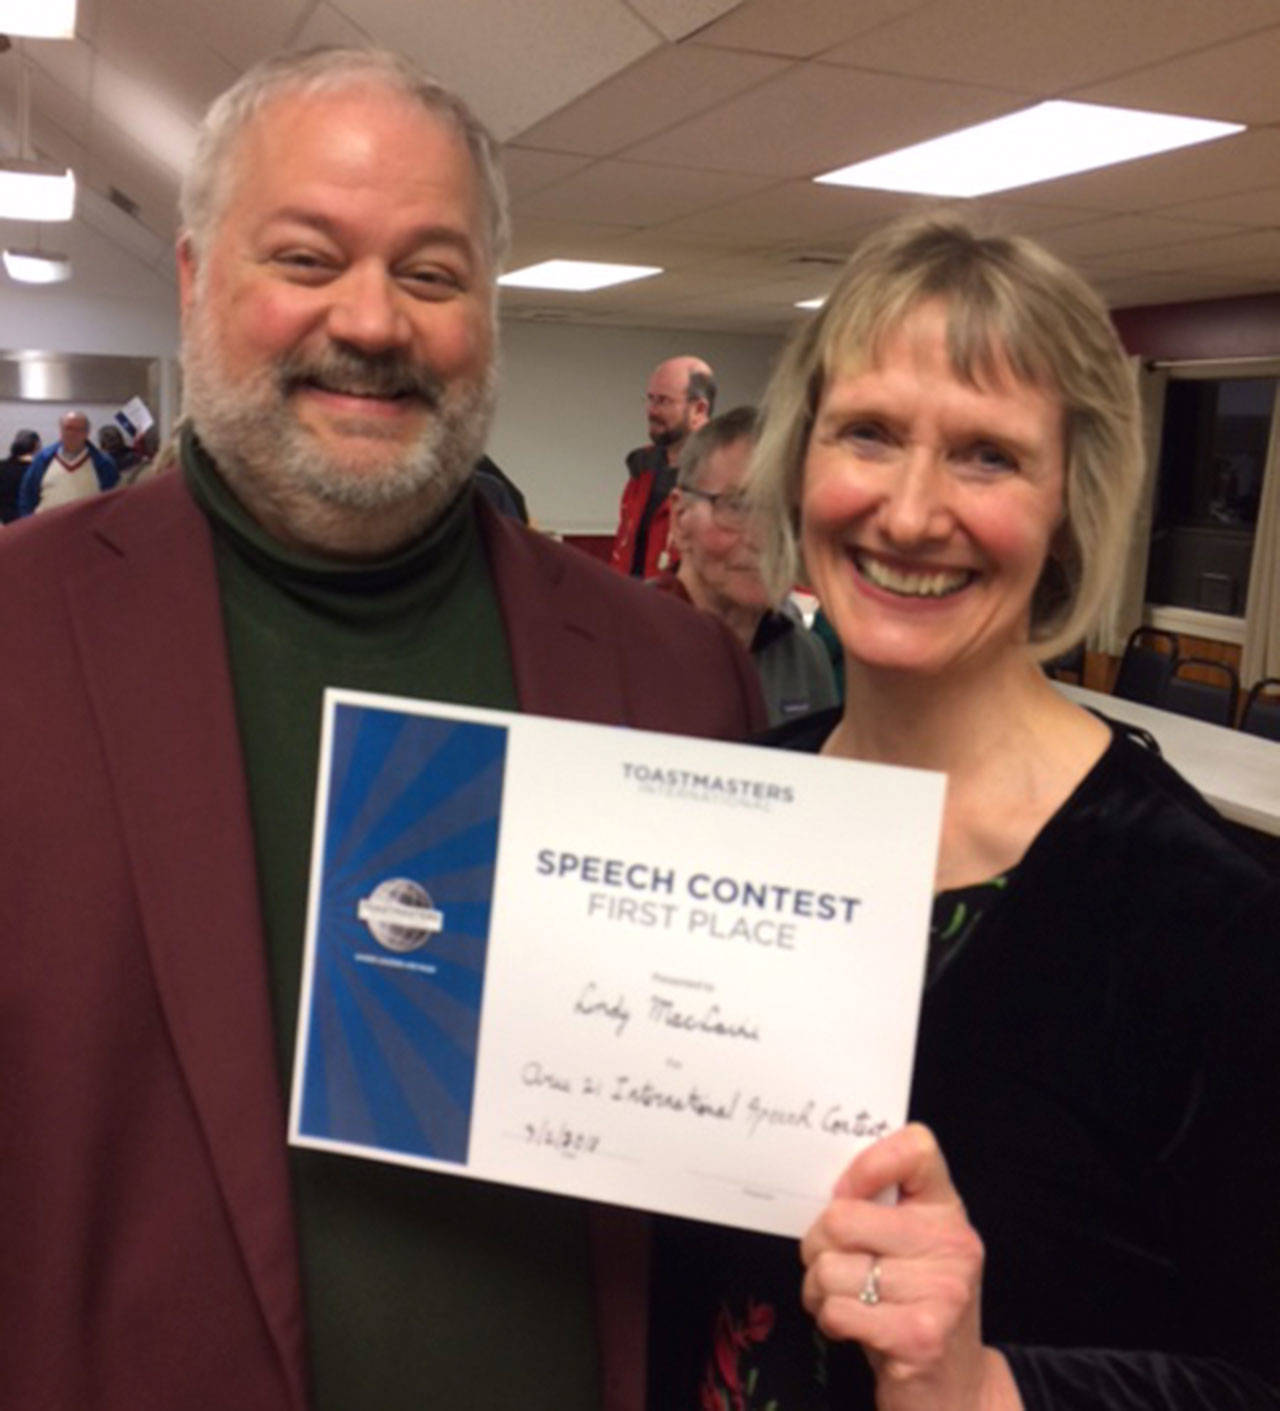 Lindy MacLaine, last year’s District 32 Toastmasters champion, celebrates her win in 2018 with District 32 Director Kyle Hall.